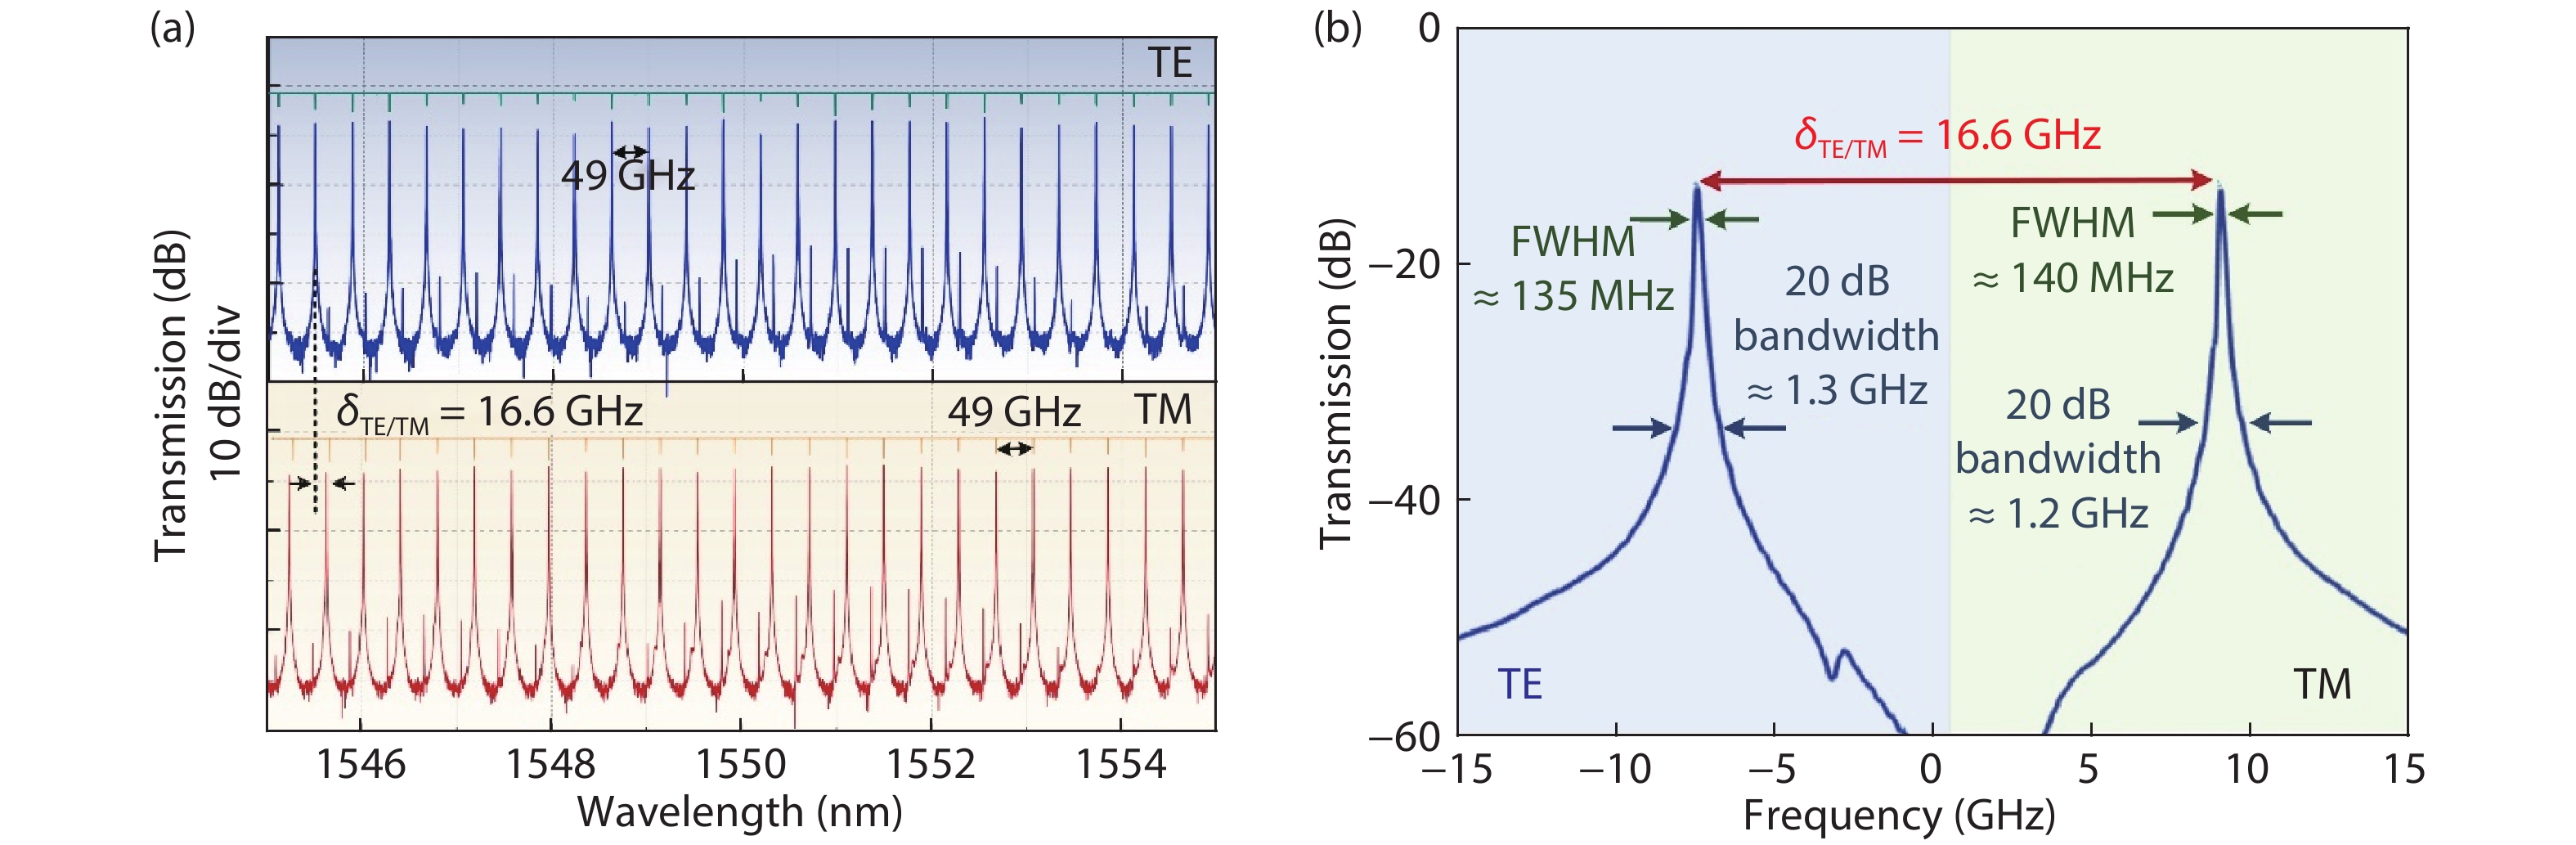 (Color online) Experimental transmission spectra for the 49 GHz FSR MRR. (a) Through-port (cyan, yellow) and drop-port (blue, red) transmission spectra of TE and TM polarizations. (b) Drop-port transmission showing the FWHM resonances of 140 MHz, with Q > 1.2 × 10 6.